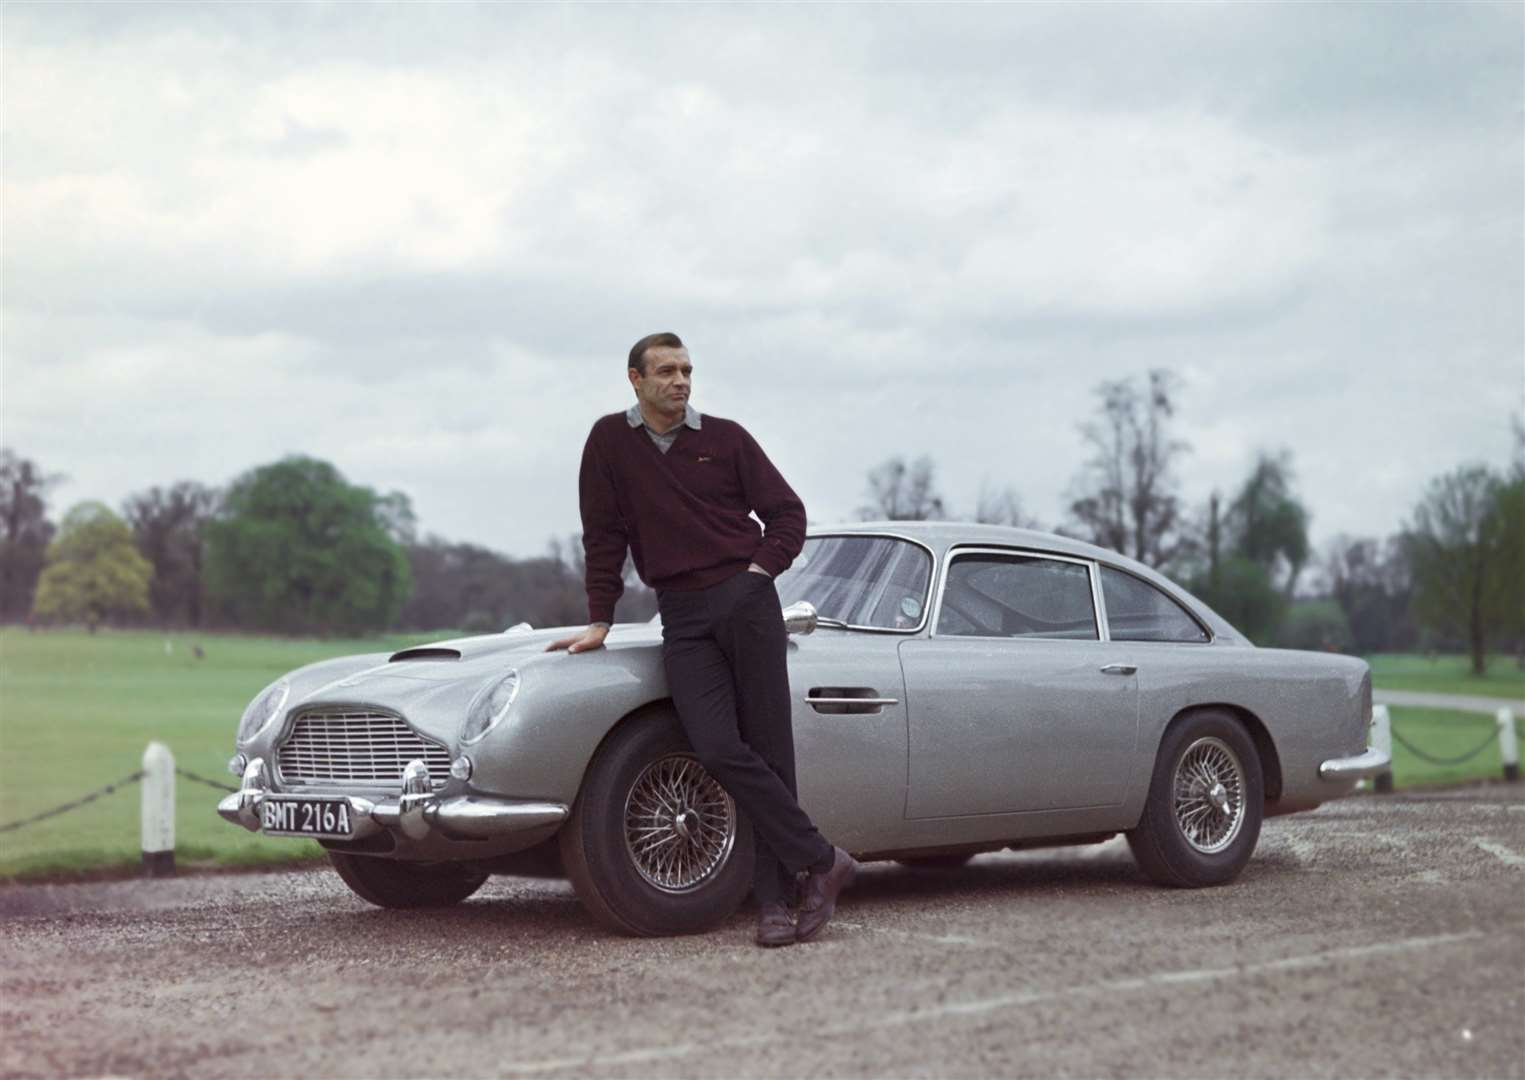 Goldfinger – Sean Connery with Bond's iconic Aston Martin.